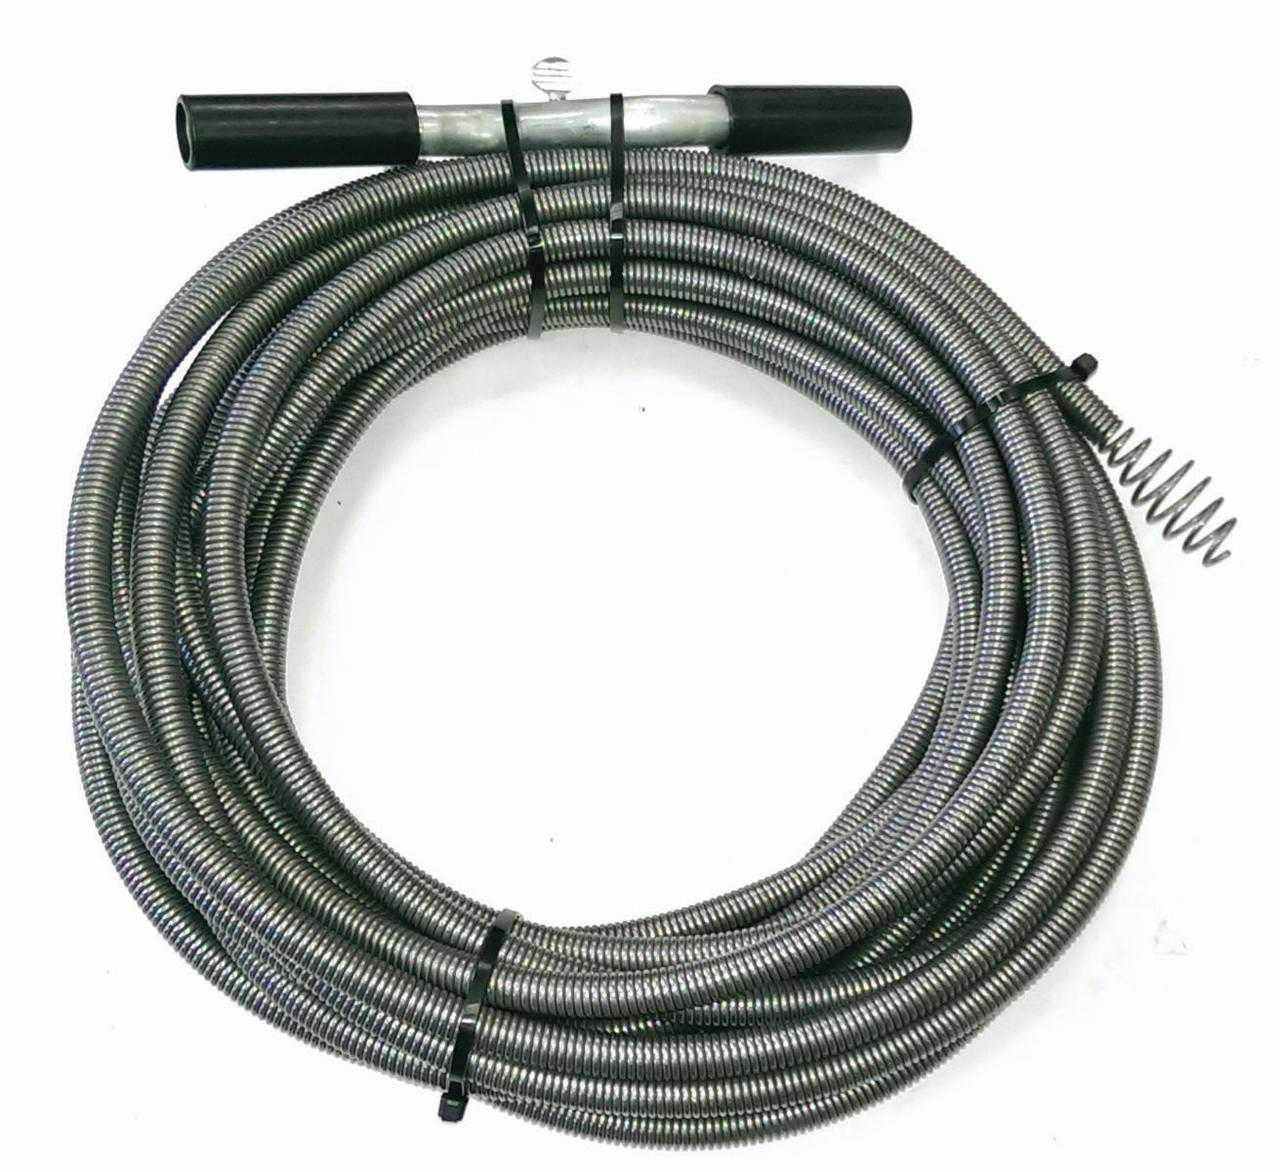 ProSource 2623601 Drain Pipe Auger, 3/8 in Dia x 50 ft L High Carbon Steel Spring Cable, Black